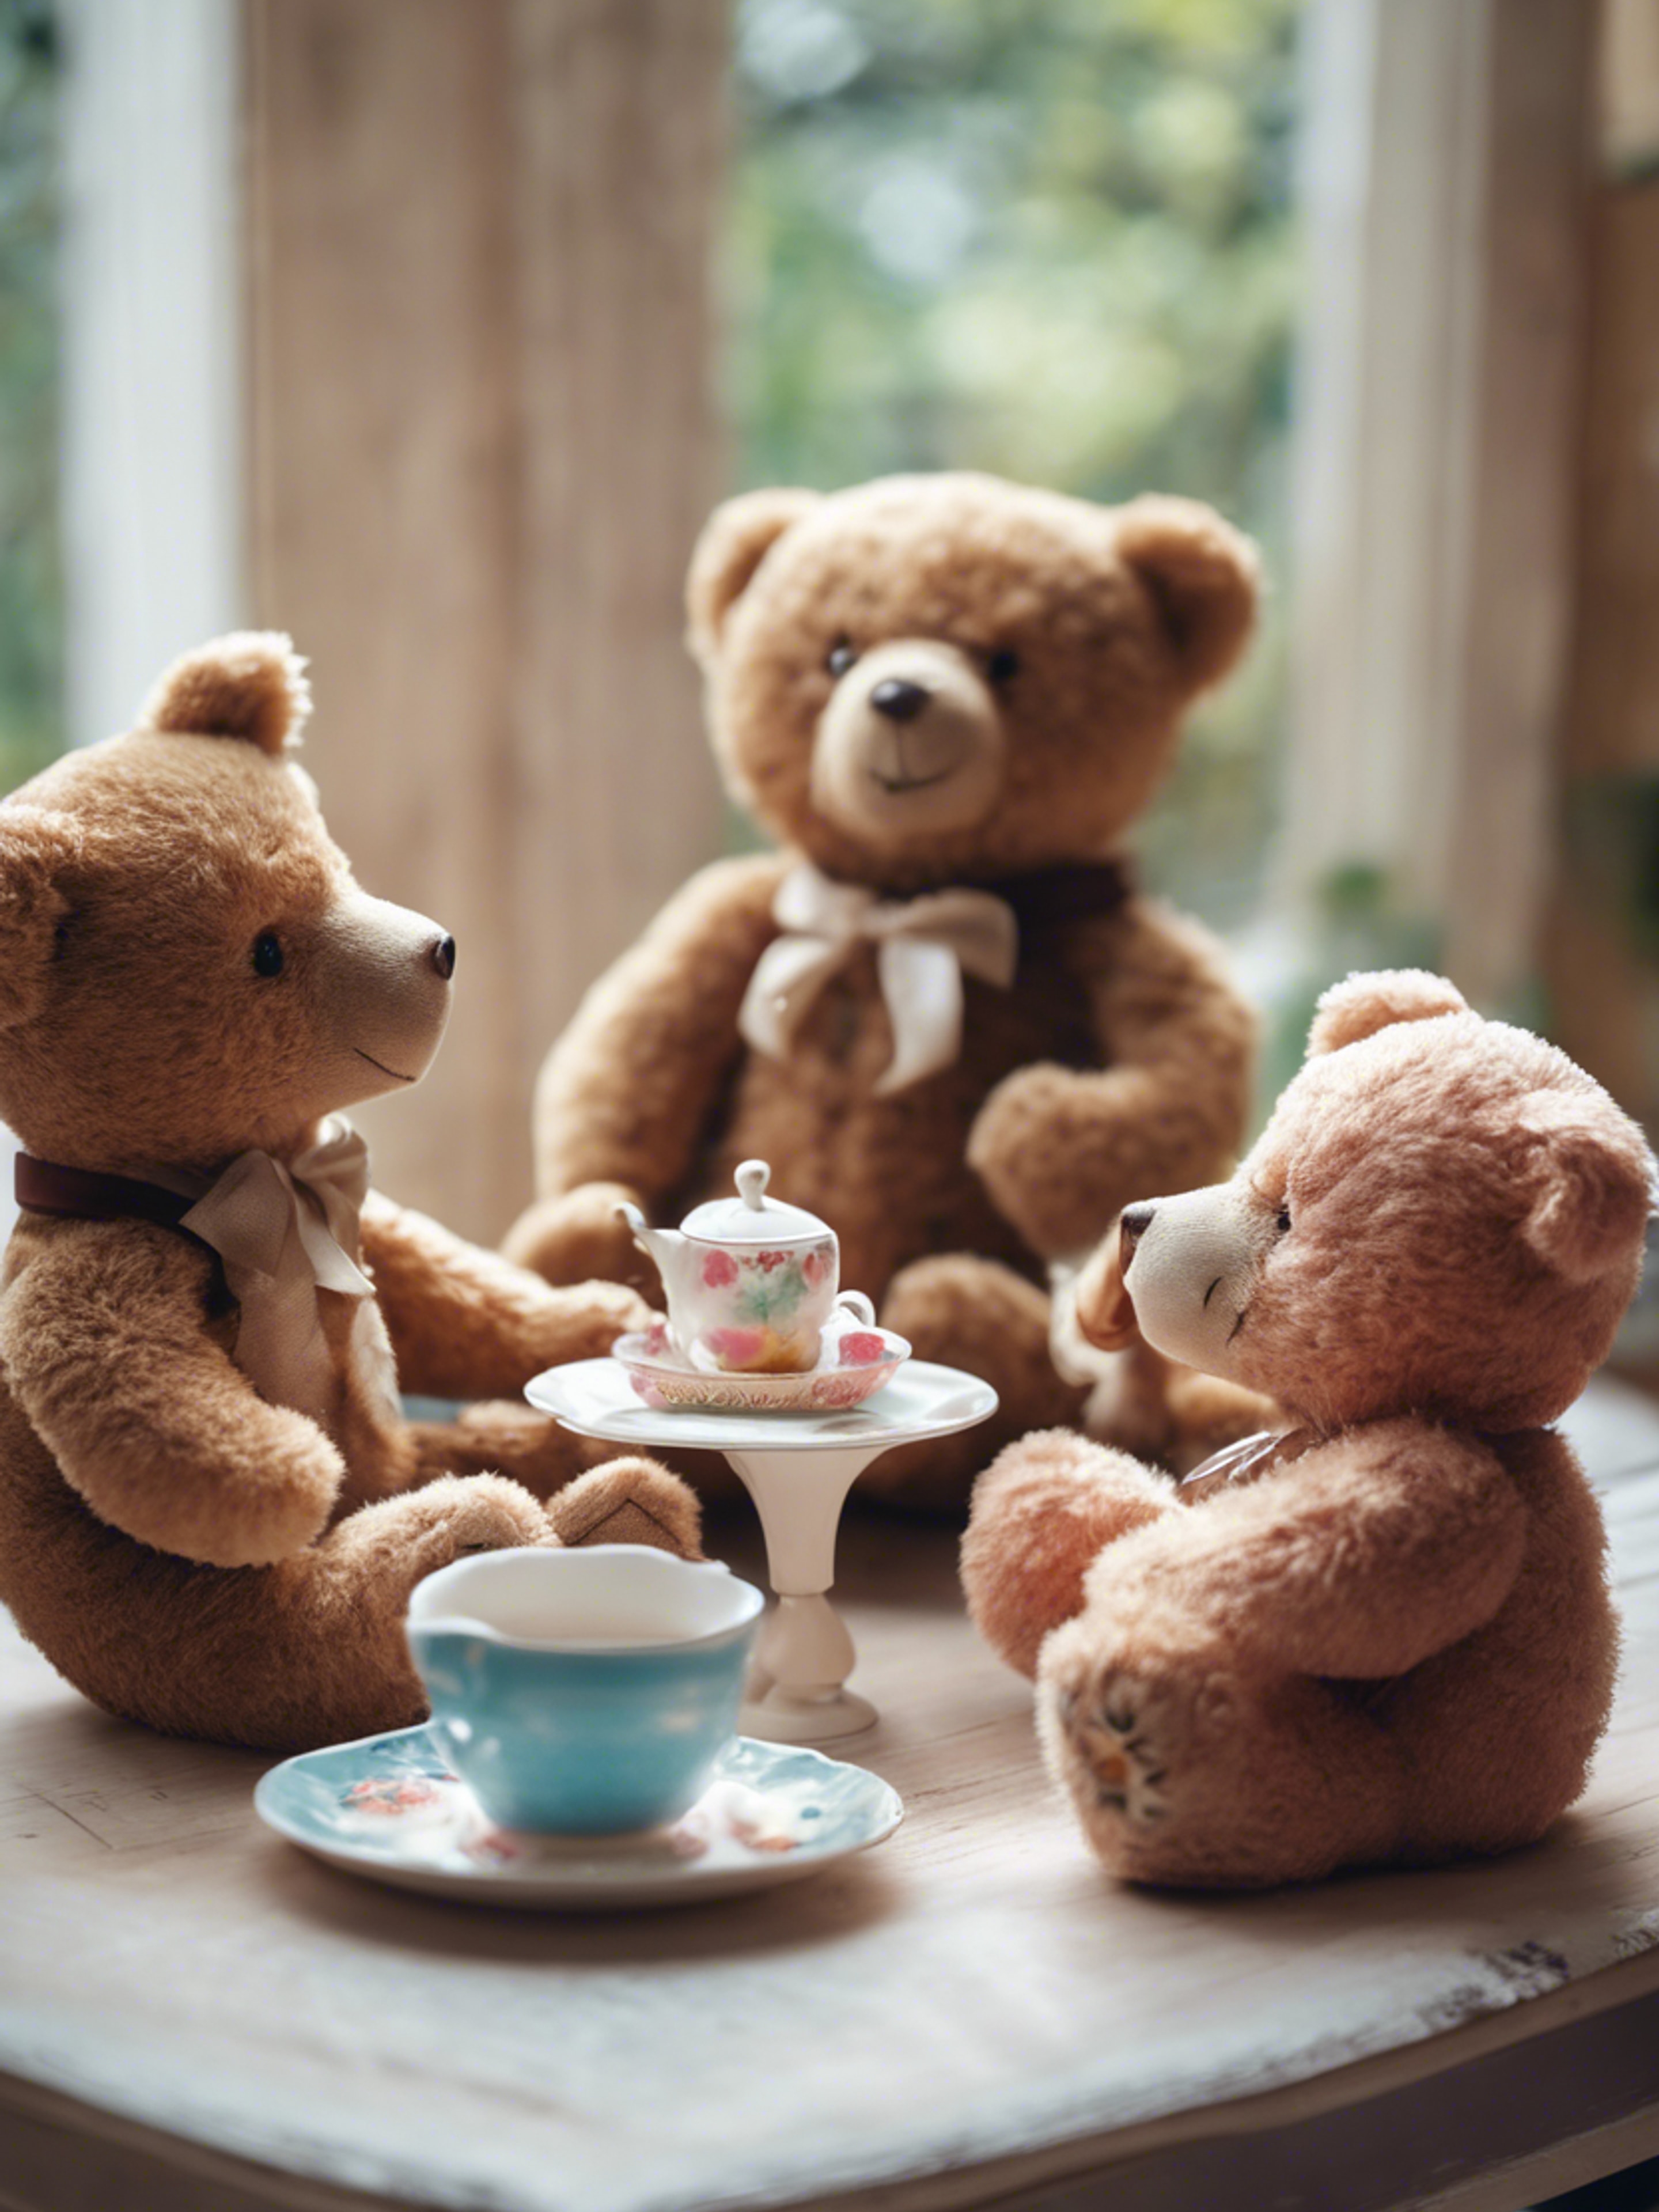 A group of teddy bears having a playful tea party in a child's room. วอลล์เปเปอร์[5c3b9dbbb3984ccebf50]